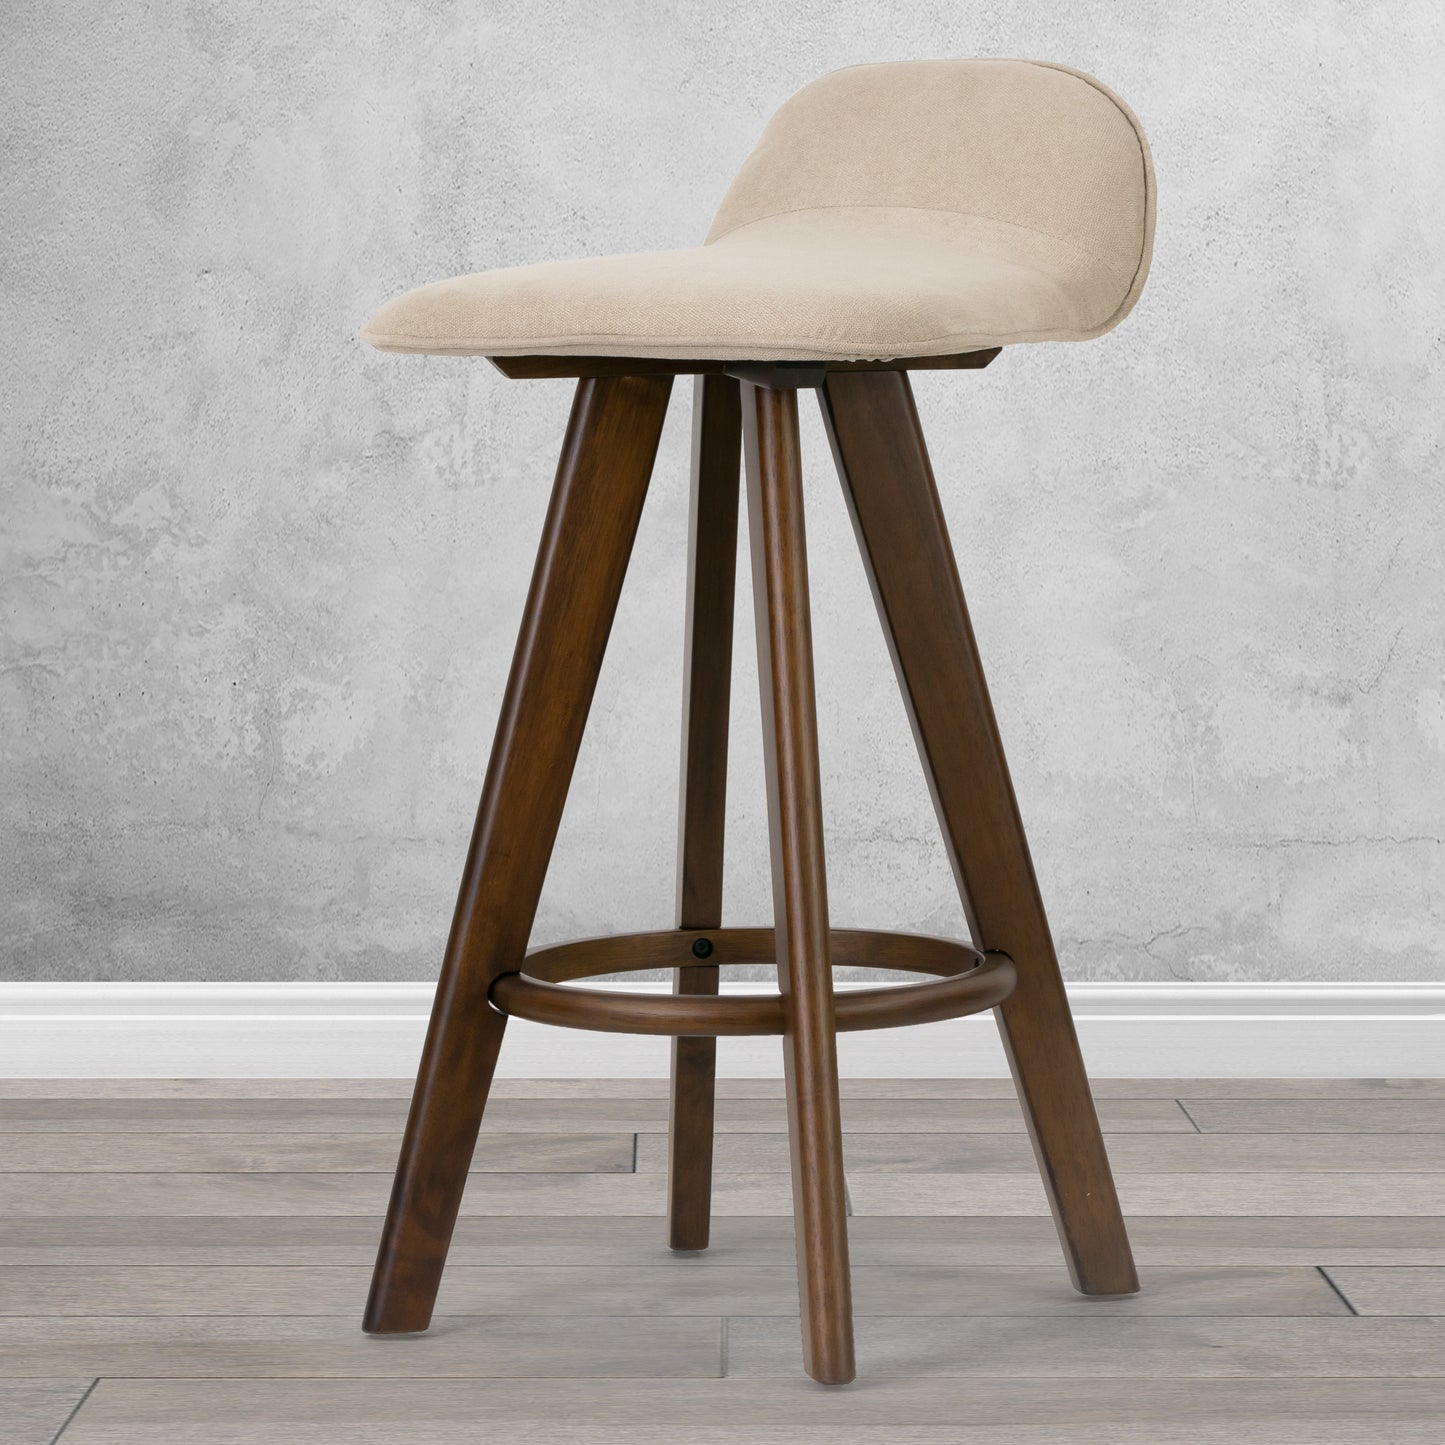 Set of 2 Asta Dark Brown Rubberwood Barstool with Low Back Fabric Seat